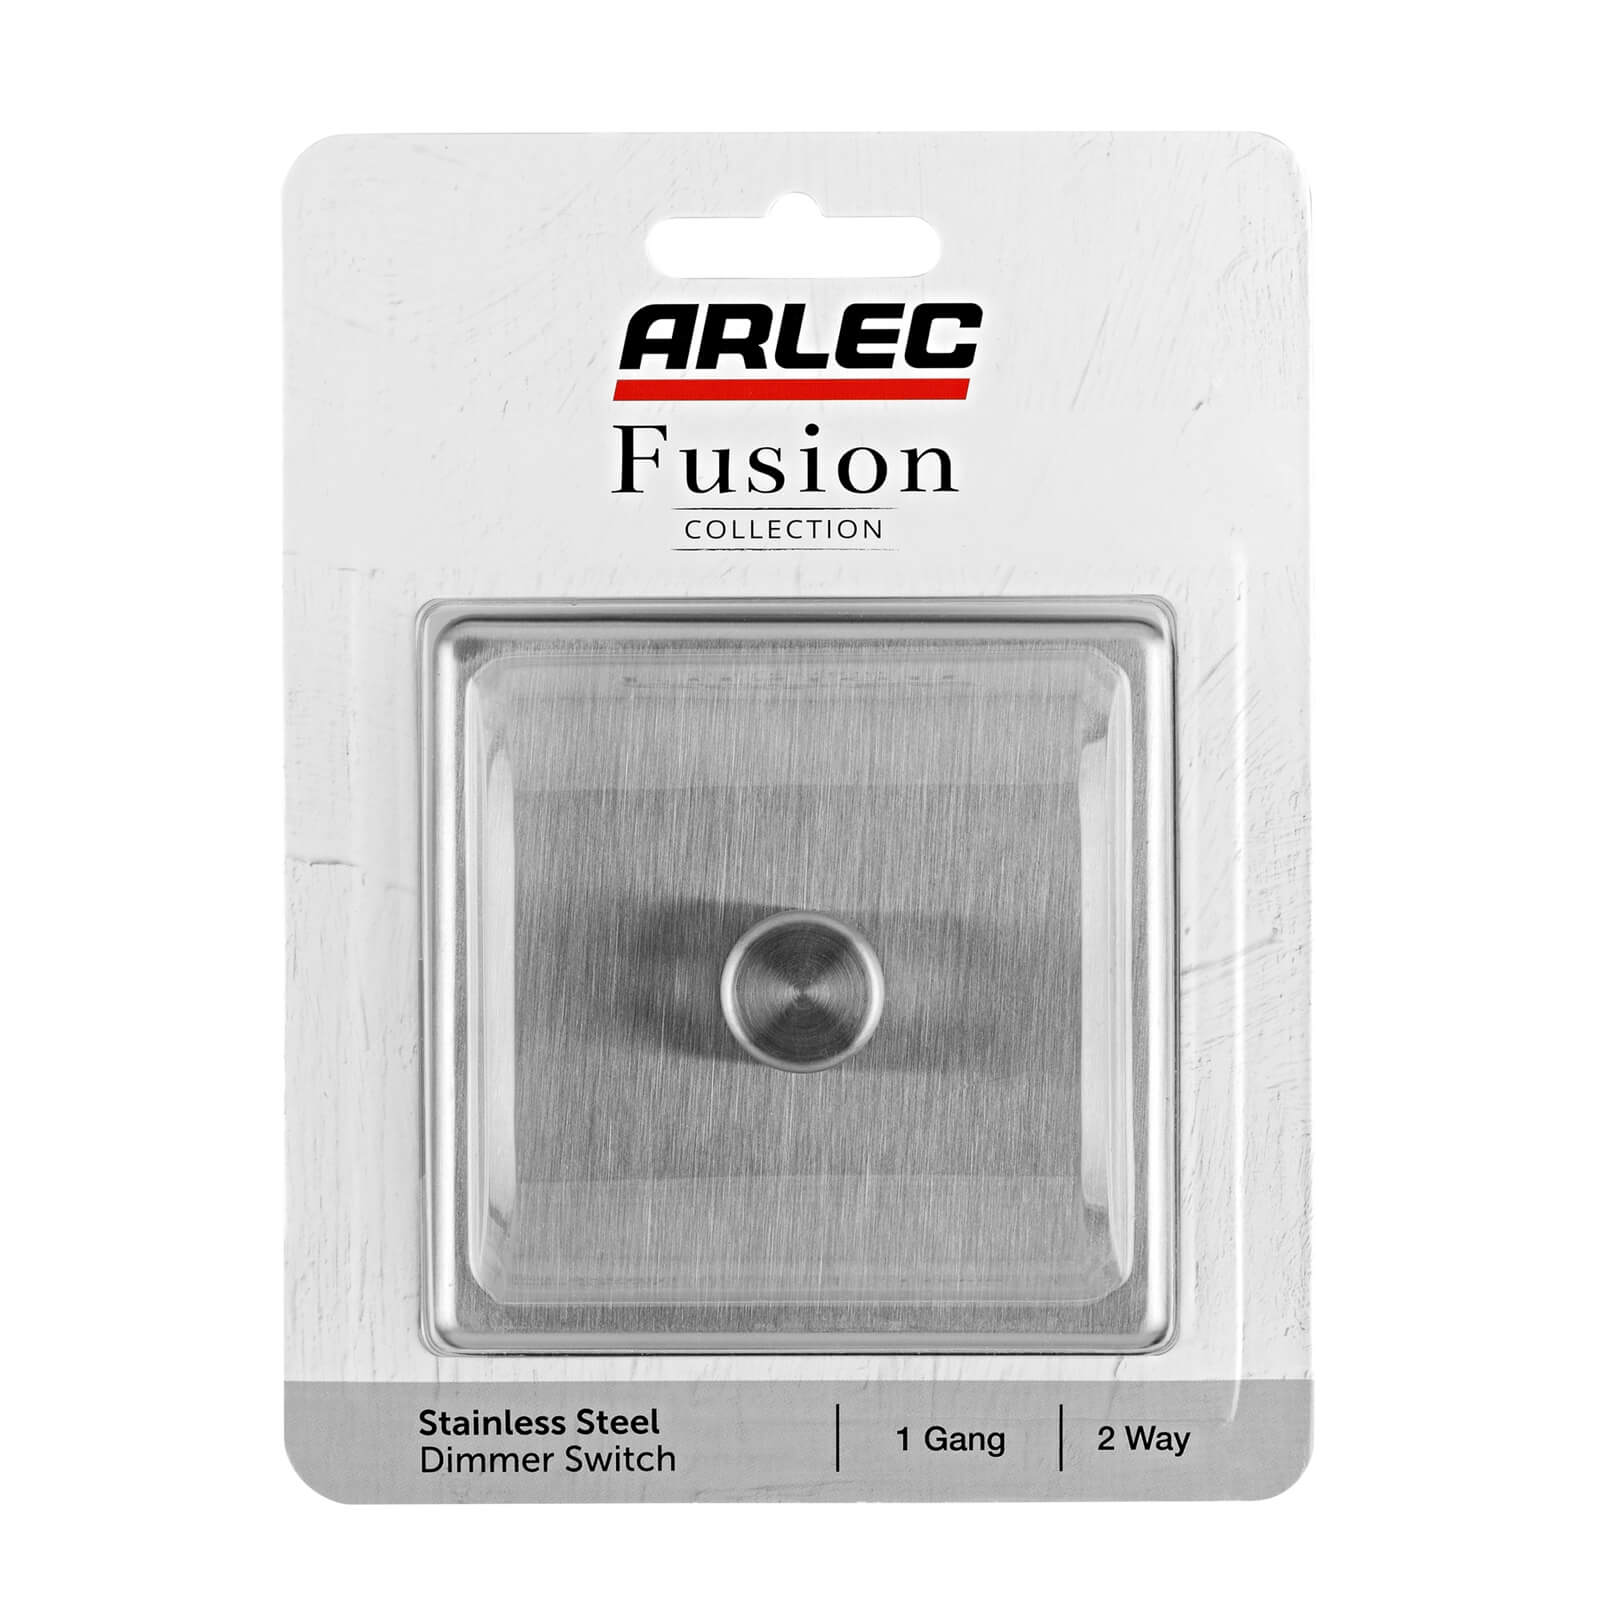 Arlec Fusion 1 Gang 2 Way Stainless Steel Dimmer switch